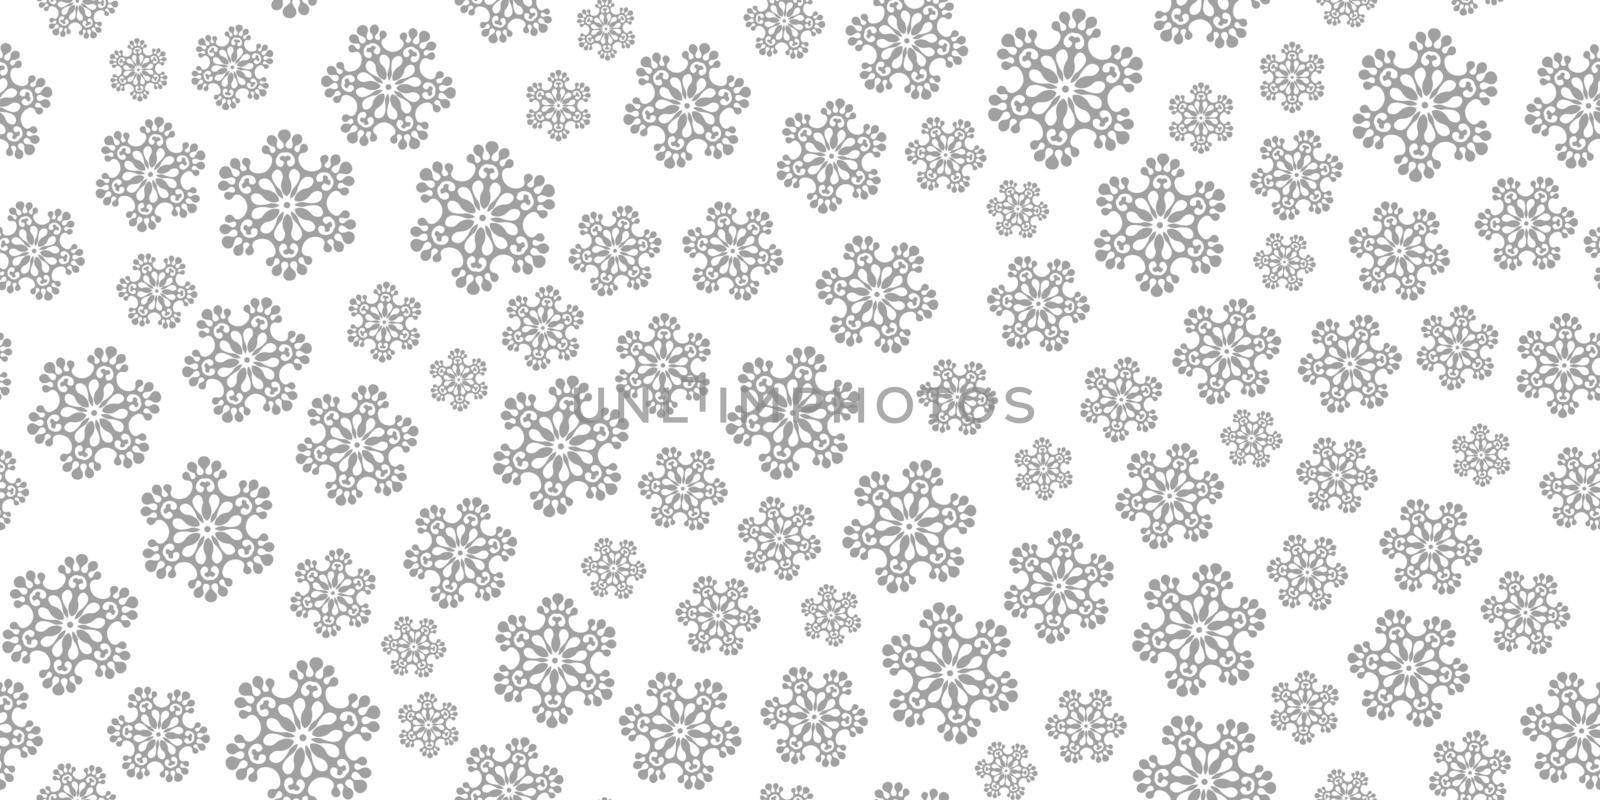 Winter seamless pattern with grey snowflakes on white background. Vector illustration for fabric, textile wallpaper, posters, gift wrapping paper. Christmas vector illustration. Falling snow by allaku